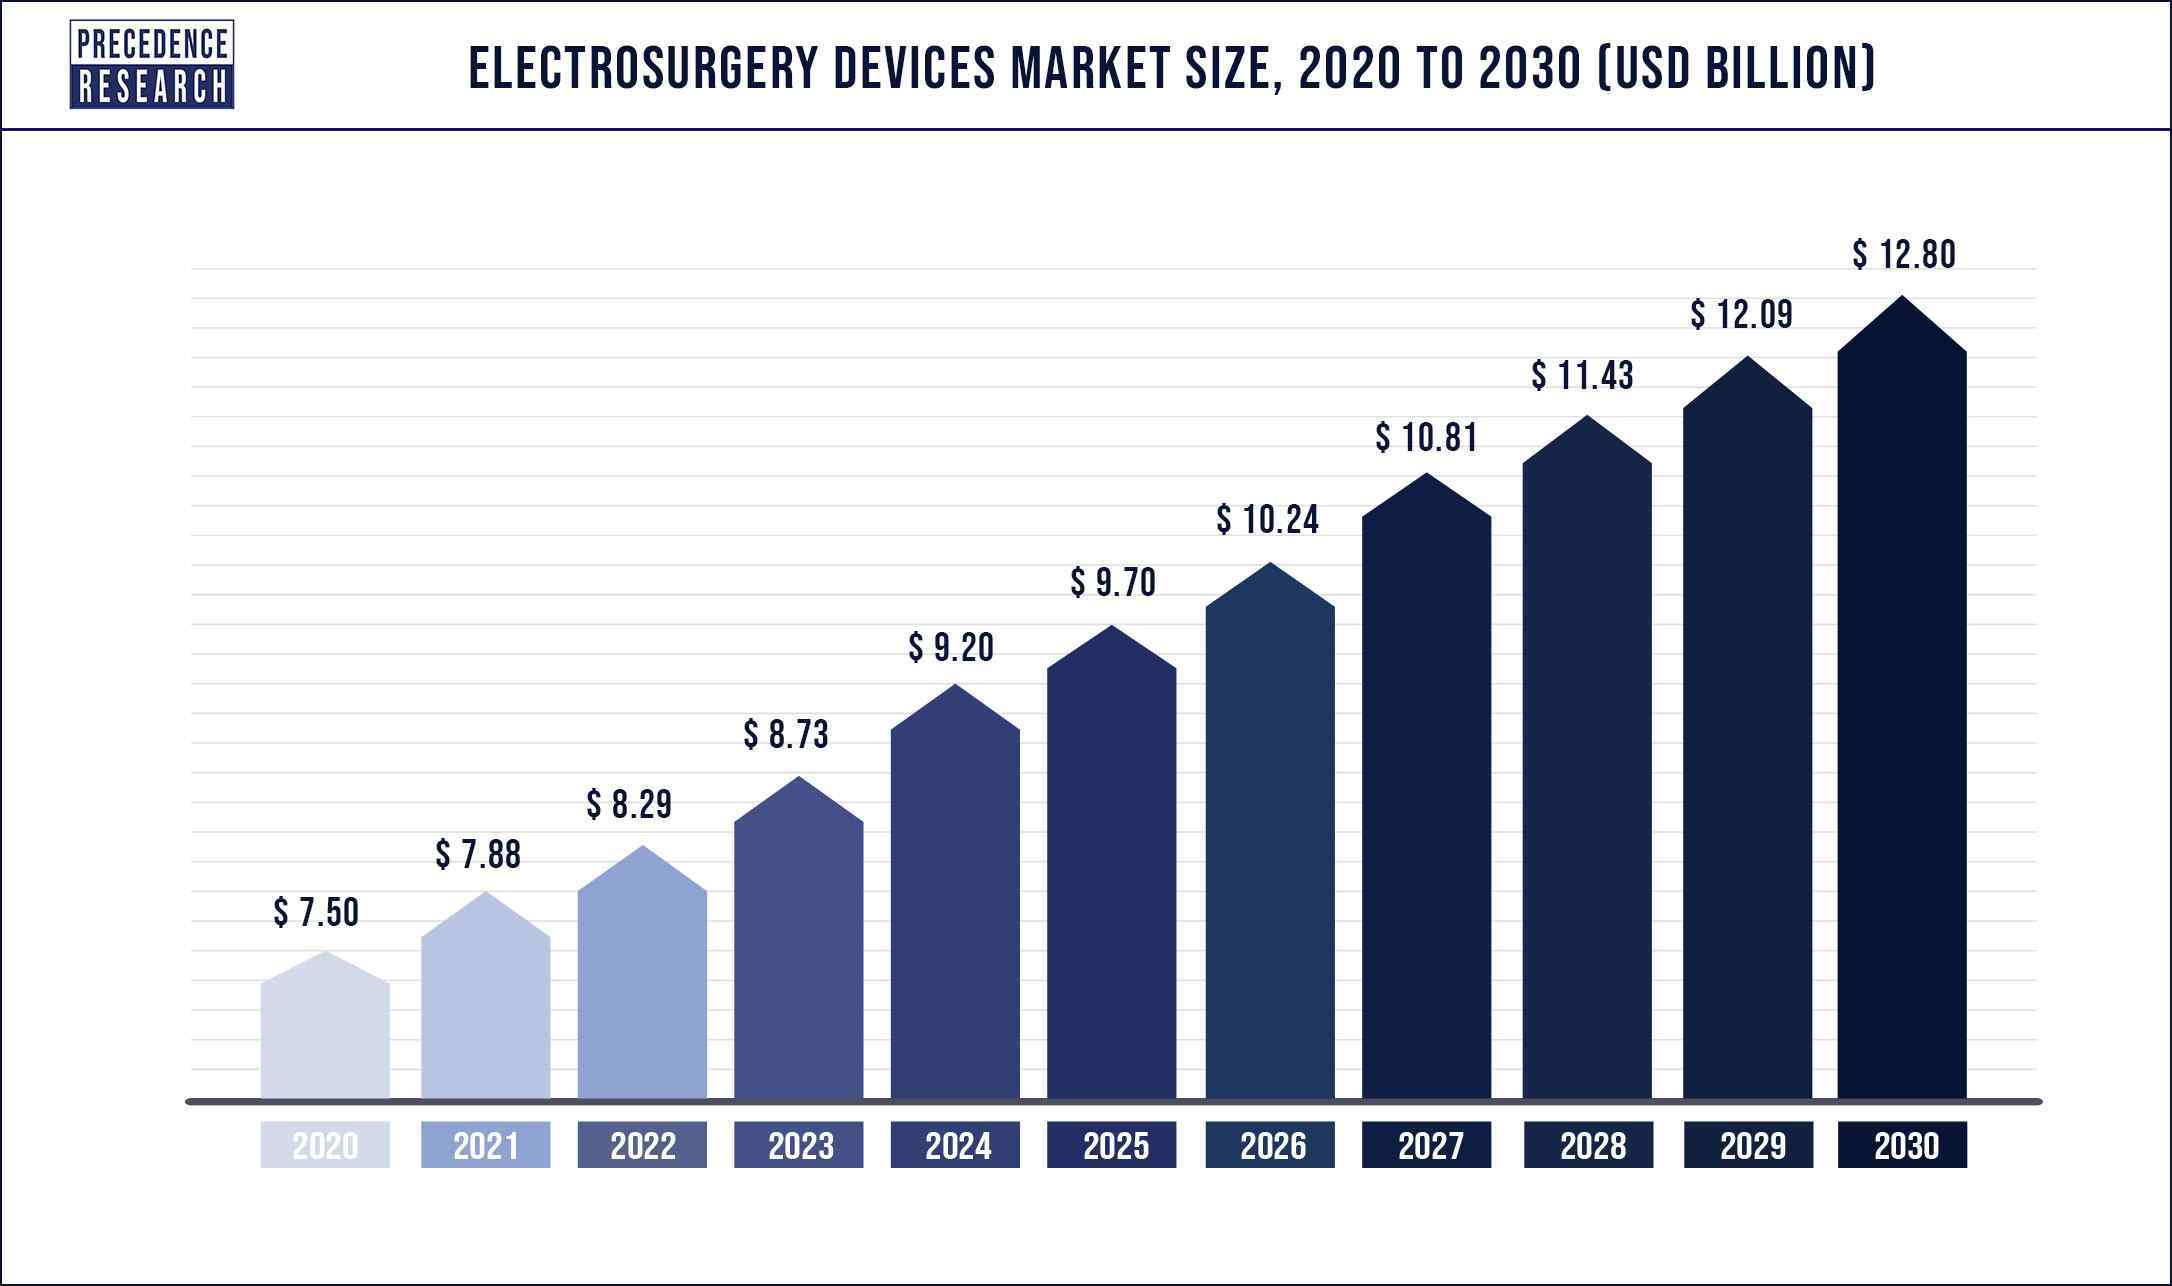 Electrosurgery Devices Market Size 2020 to 2030